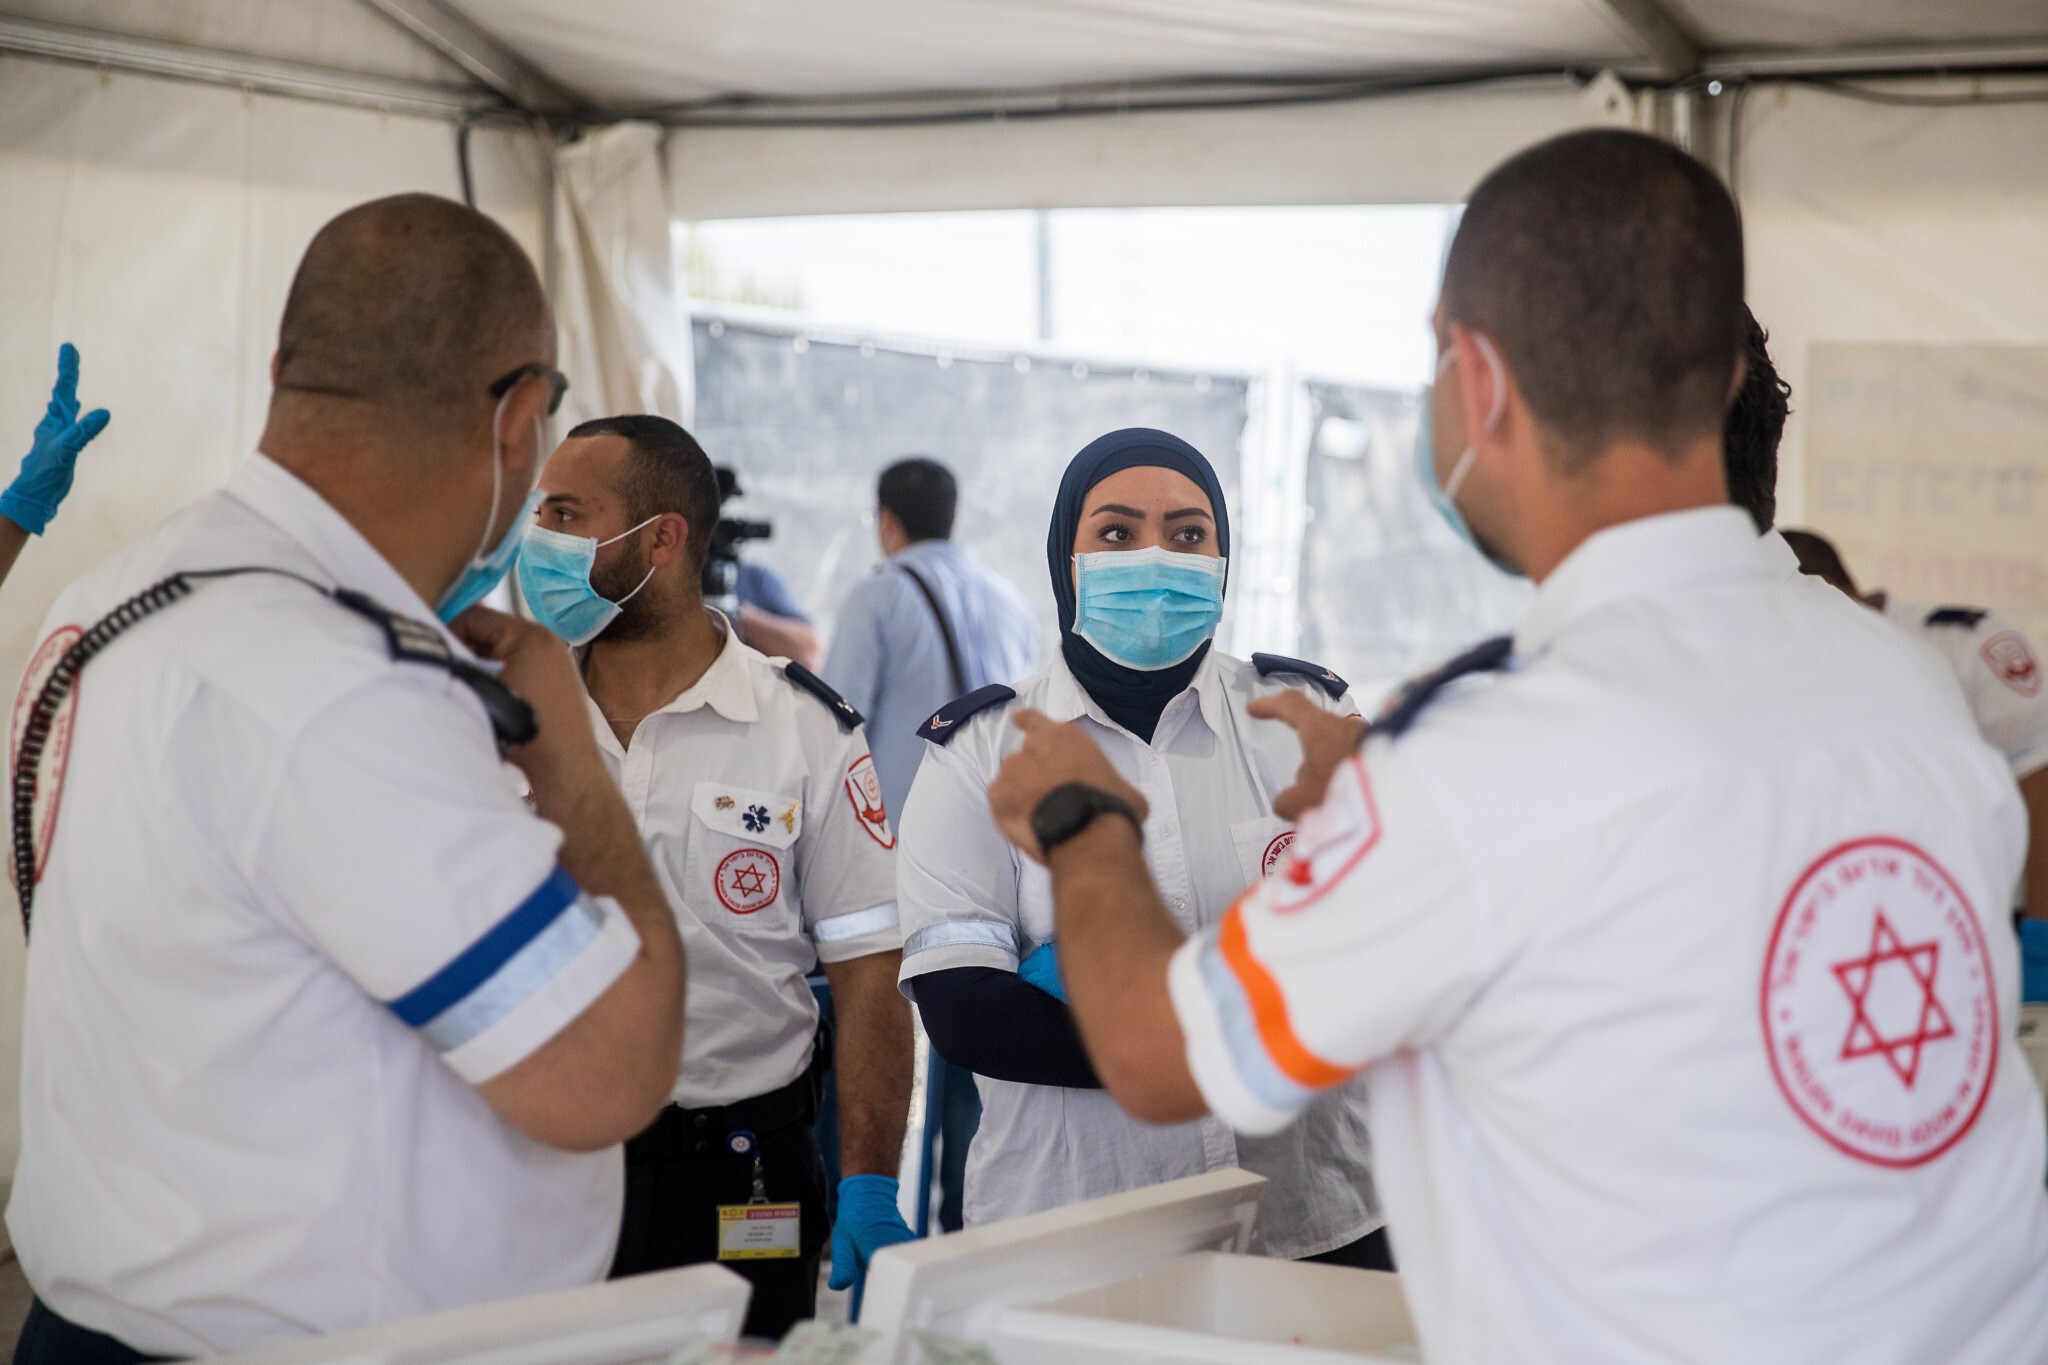 Magen David Adom medical workers seen at a drive-through site to collect samples for coronavirus testing, at the entrance to the East Jerusalem neighborhood of Jabel Mukaber, on April 2, 2020. (Yonatan Sindel/Flash90)